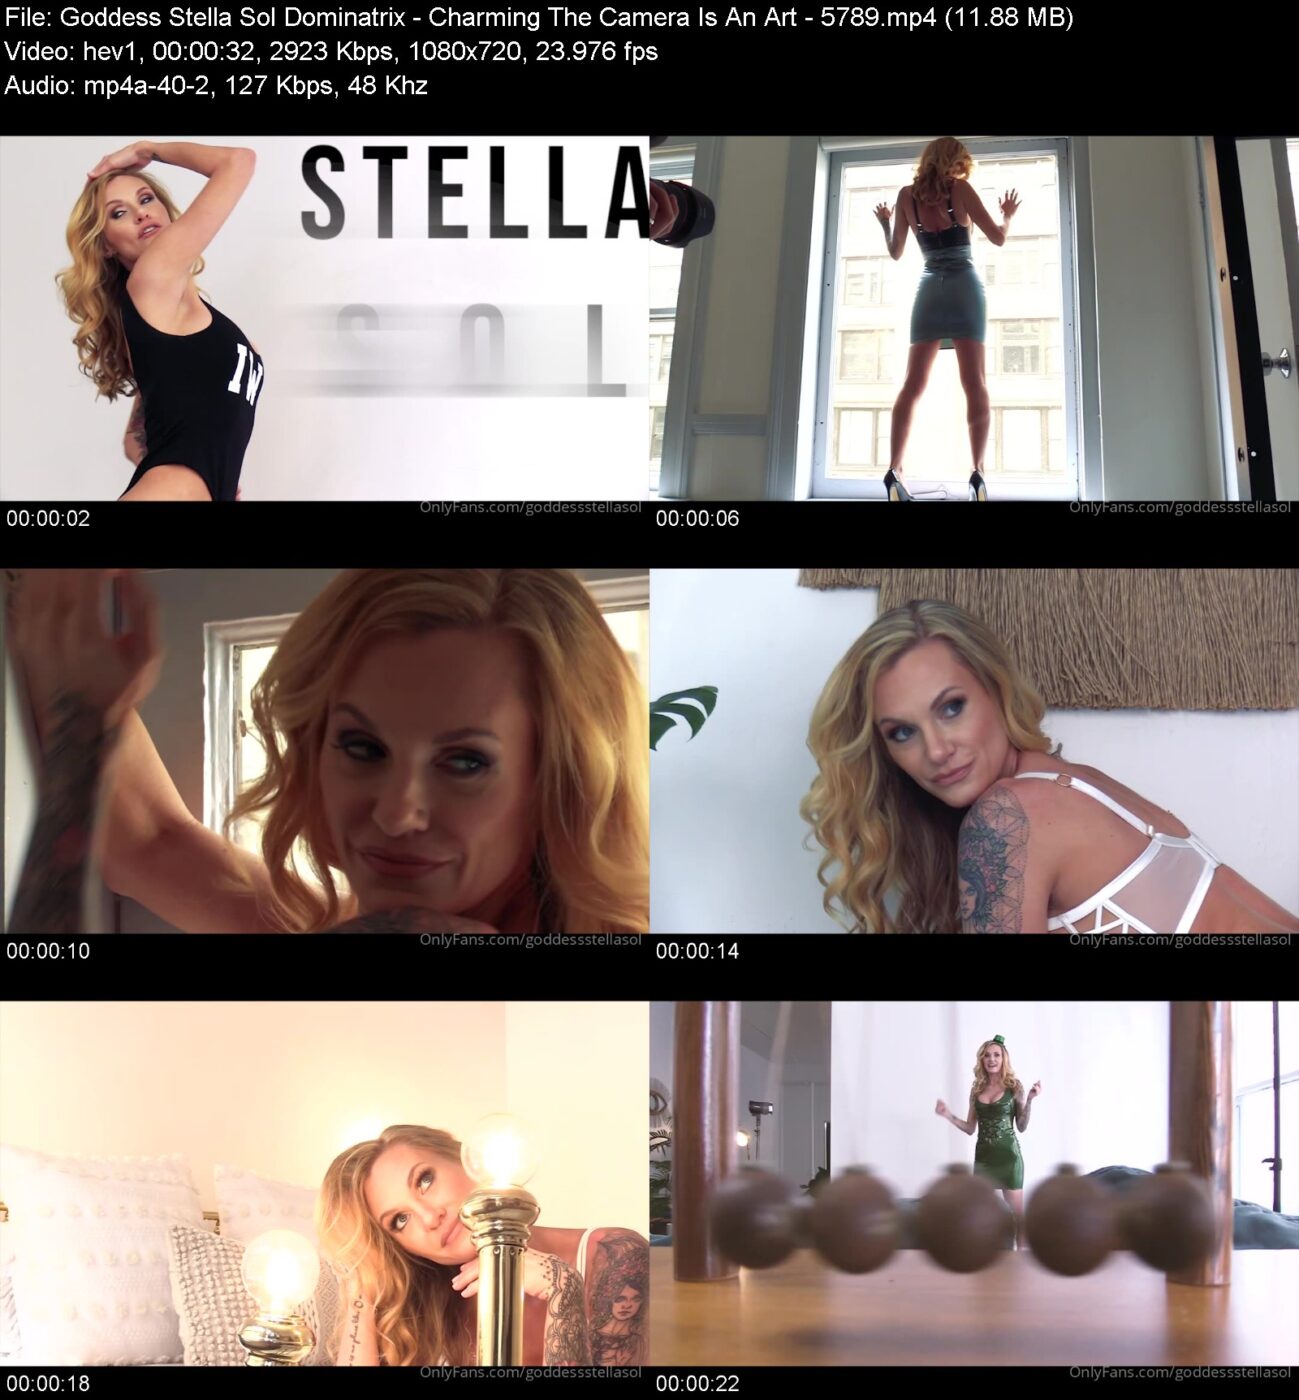 Actress: Goddess Stella Sol Dominatrix. Title and Studio: Charming The Camera Is An Art – 5789